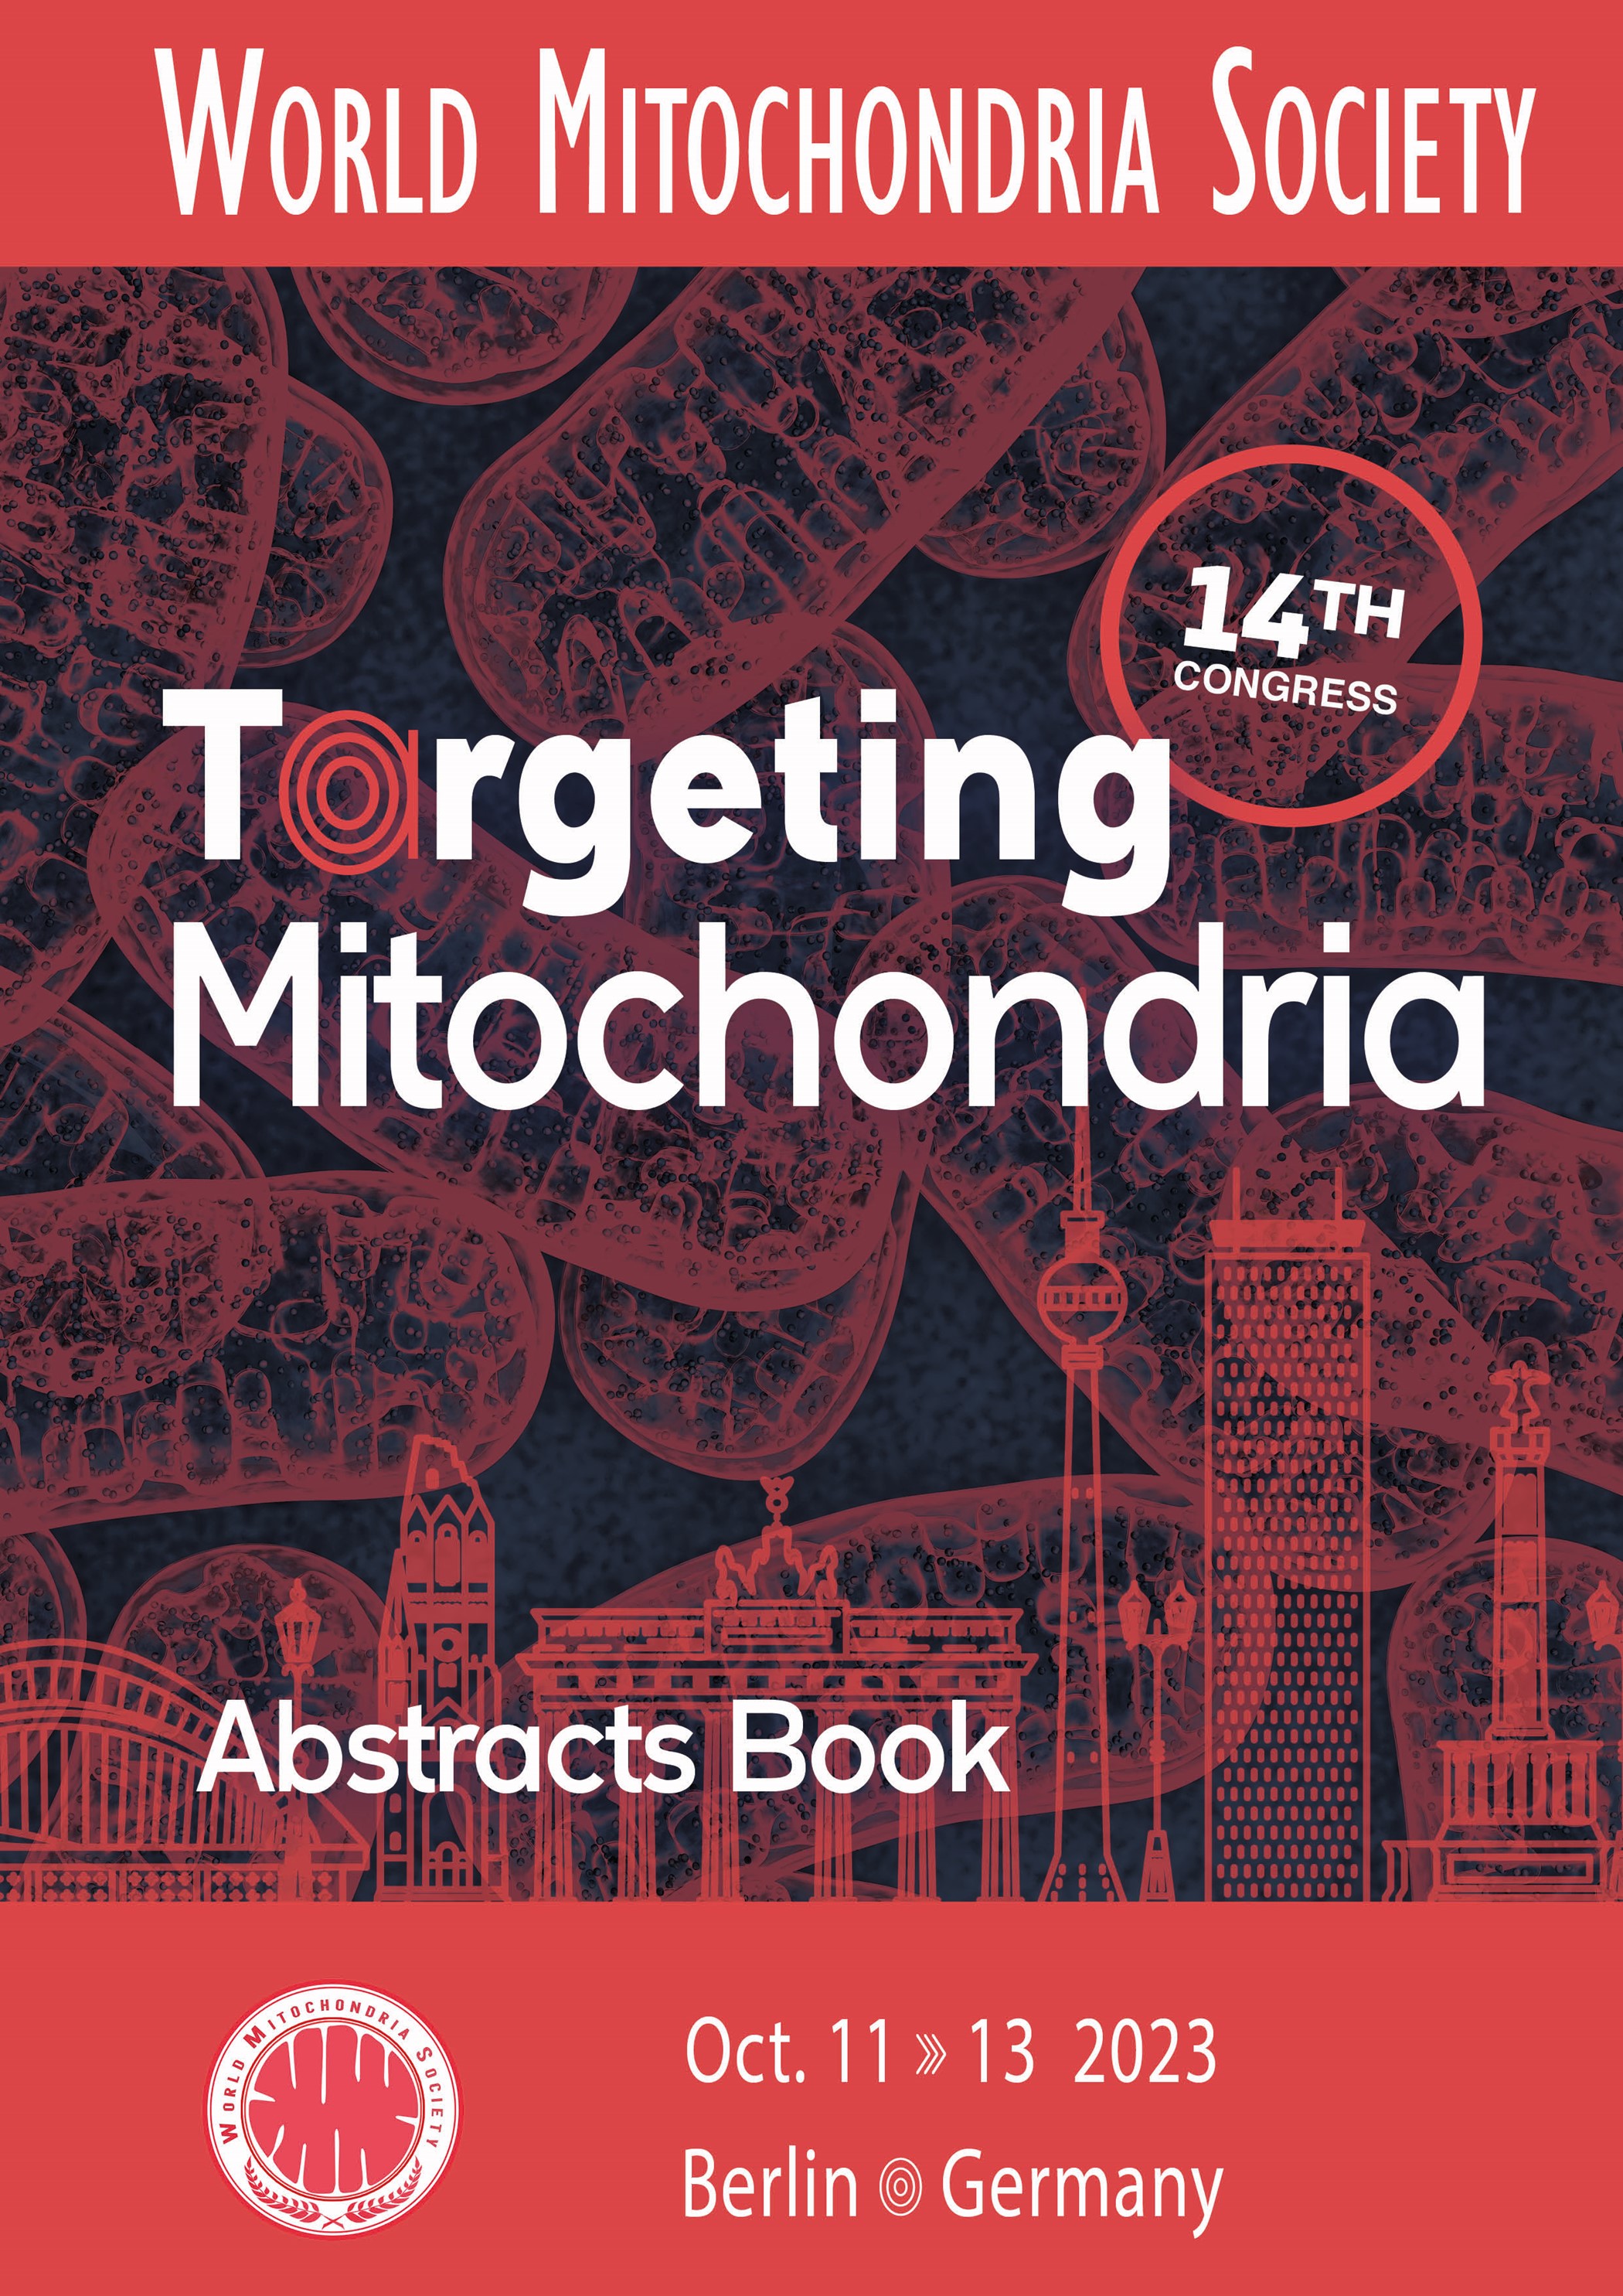 Targeting Mitochondria 2023 Abstracts Book